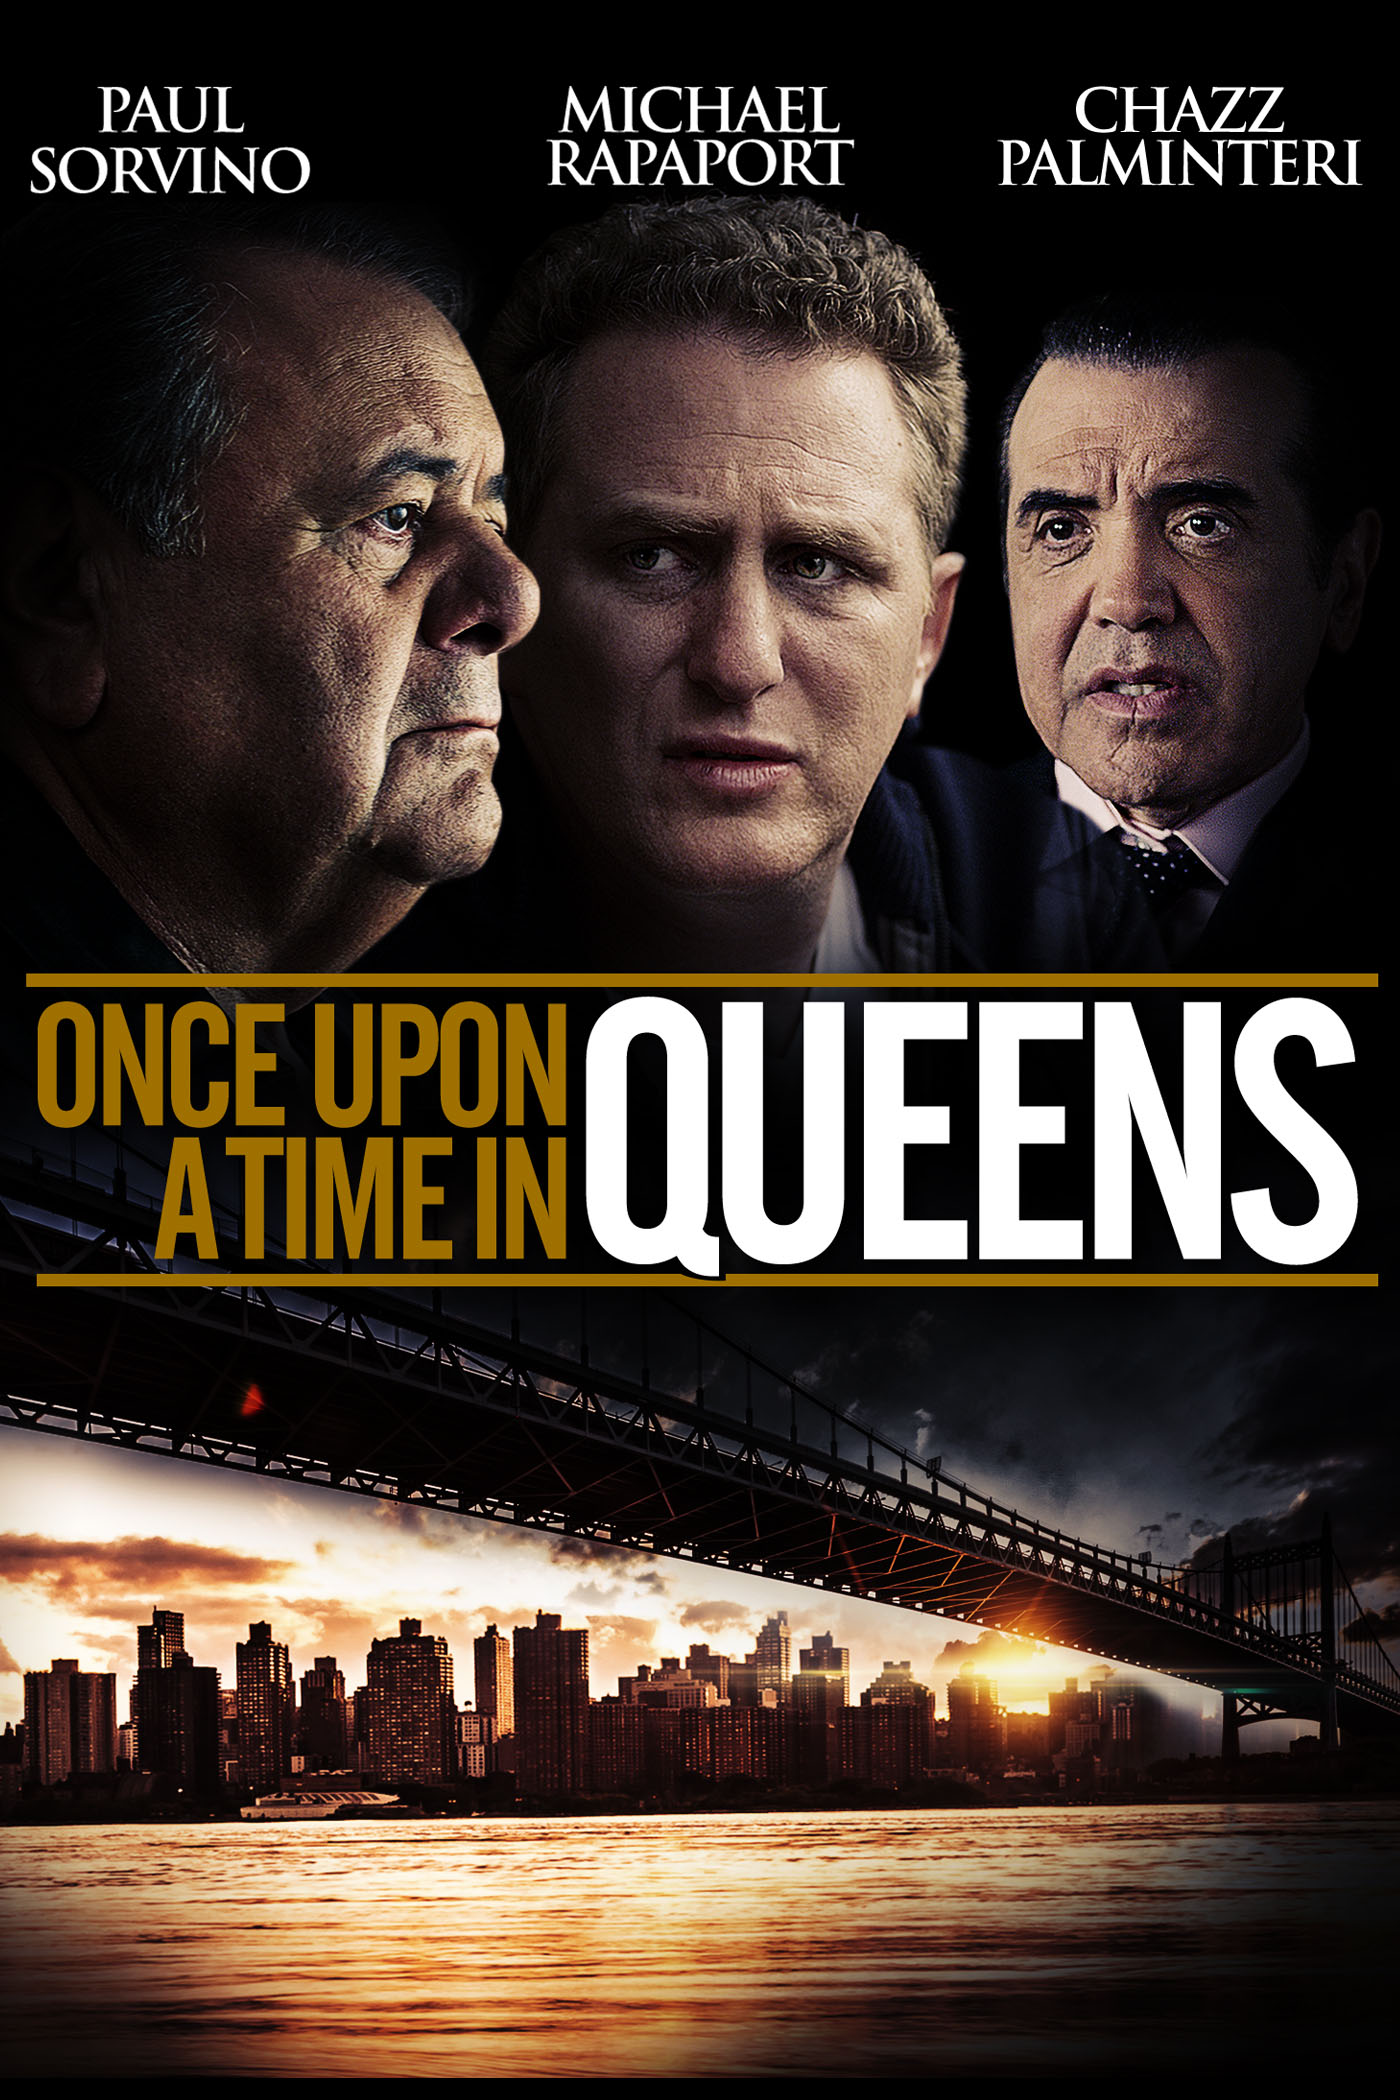 Once Upon a Time in Queens (2013) Screenshot 1